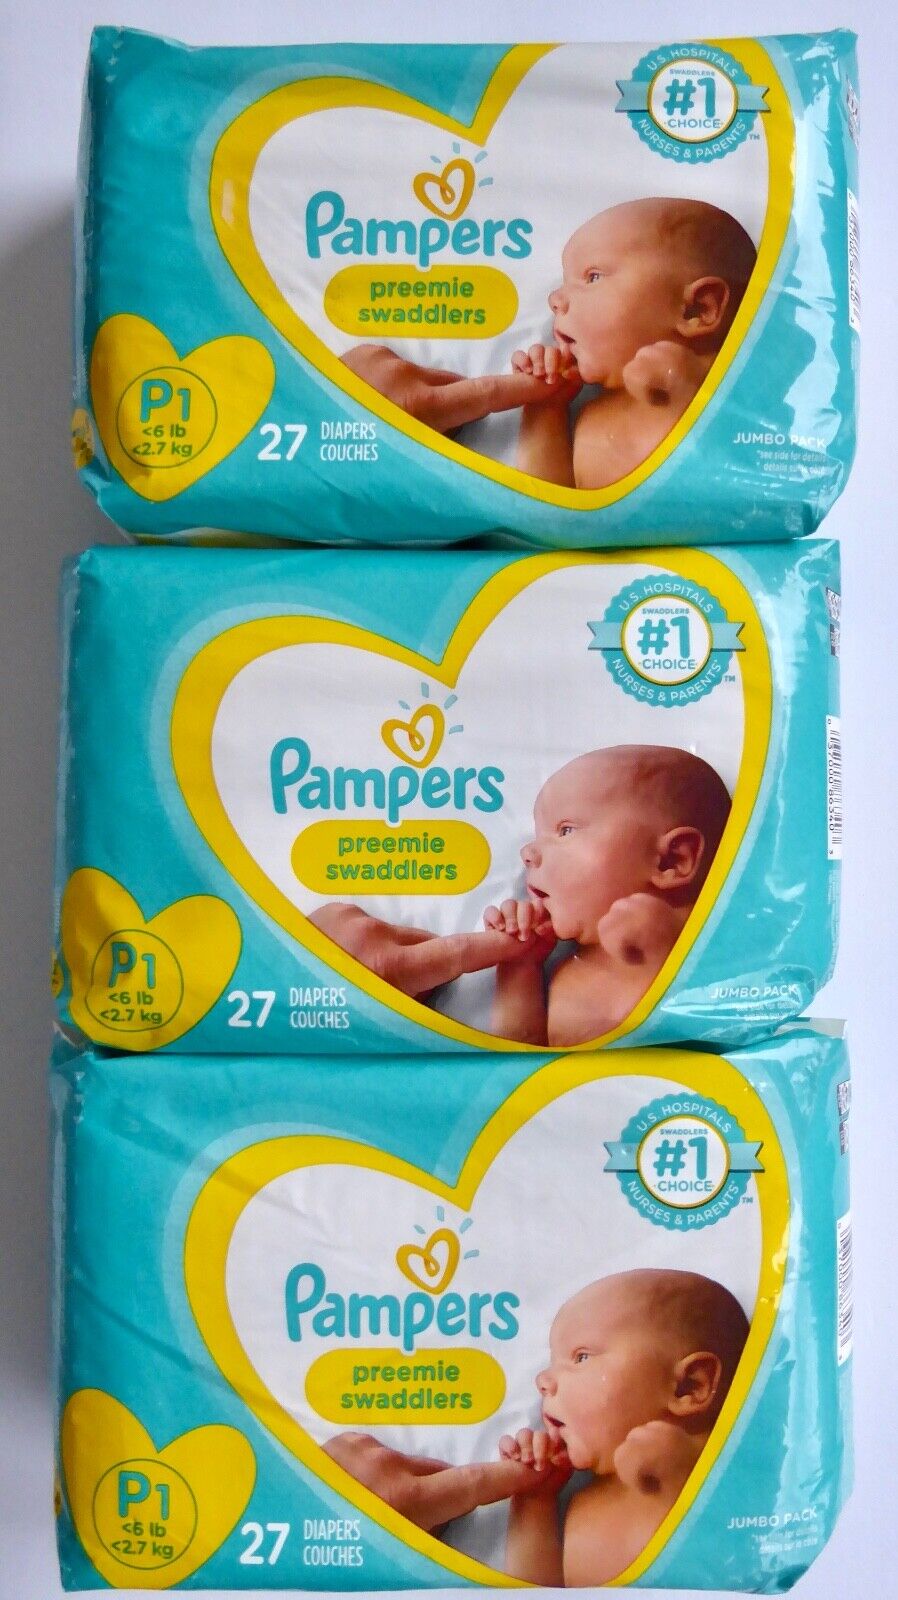 Lot Of 3 Pampers Swaddlers Diapers - Preemie P1    6 Lb - 27 Pack New Sealed =81